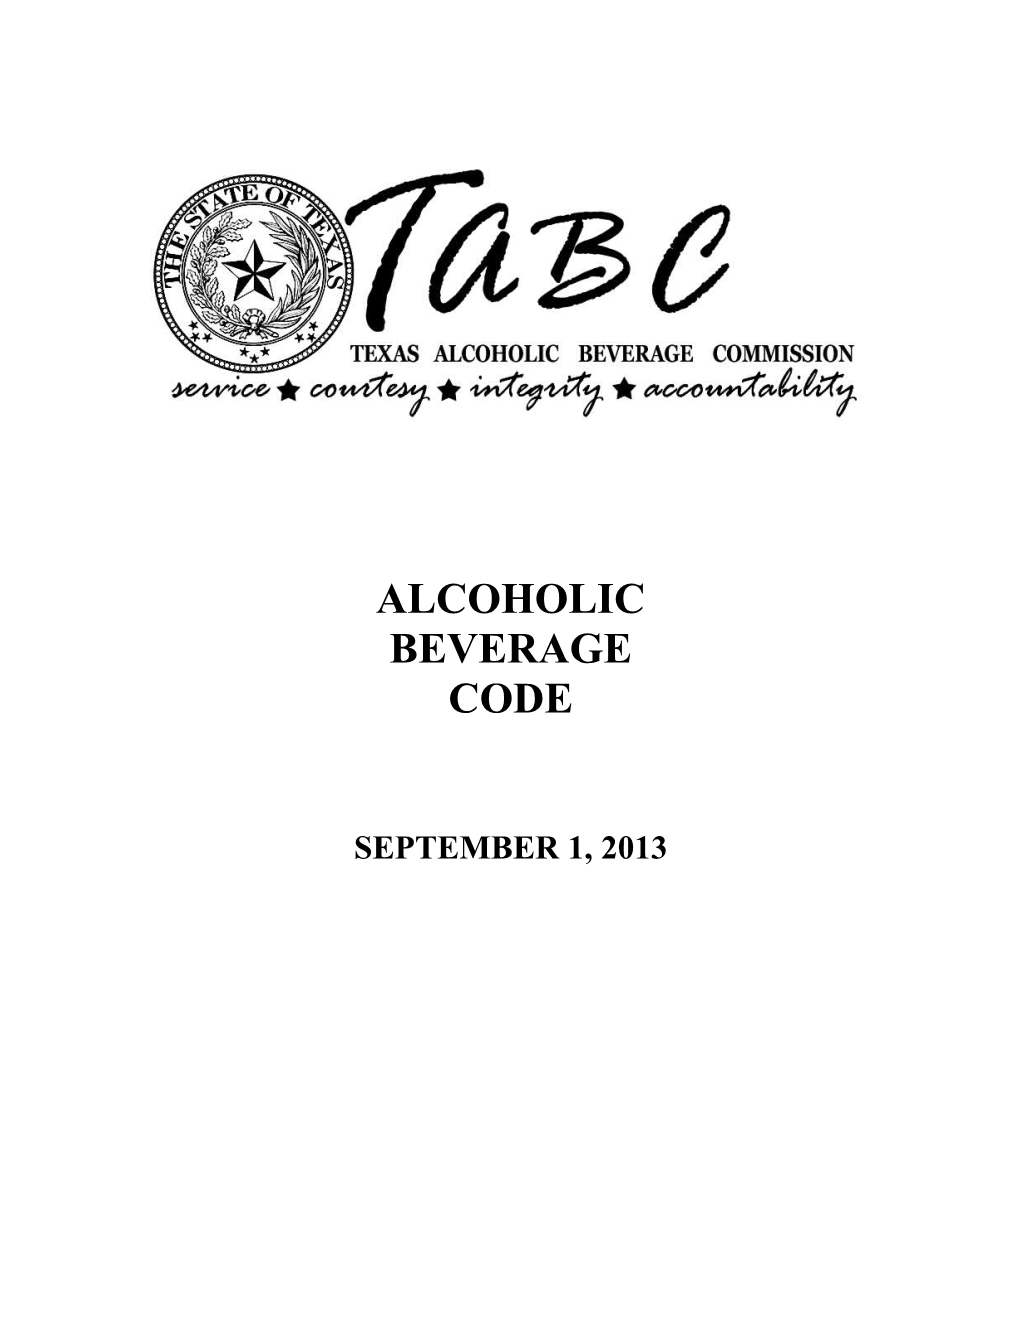 Note Regarding Constitutionality of Certain Parts of the Alcoholic Beverage Code